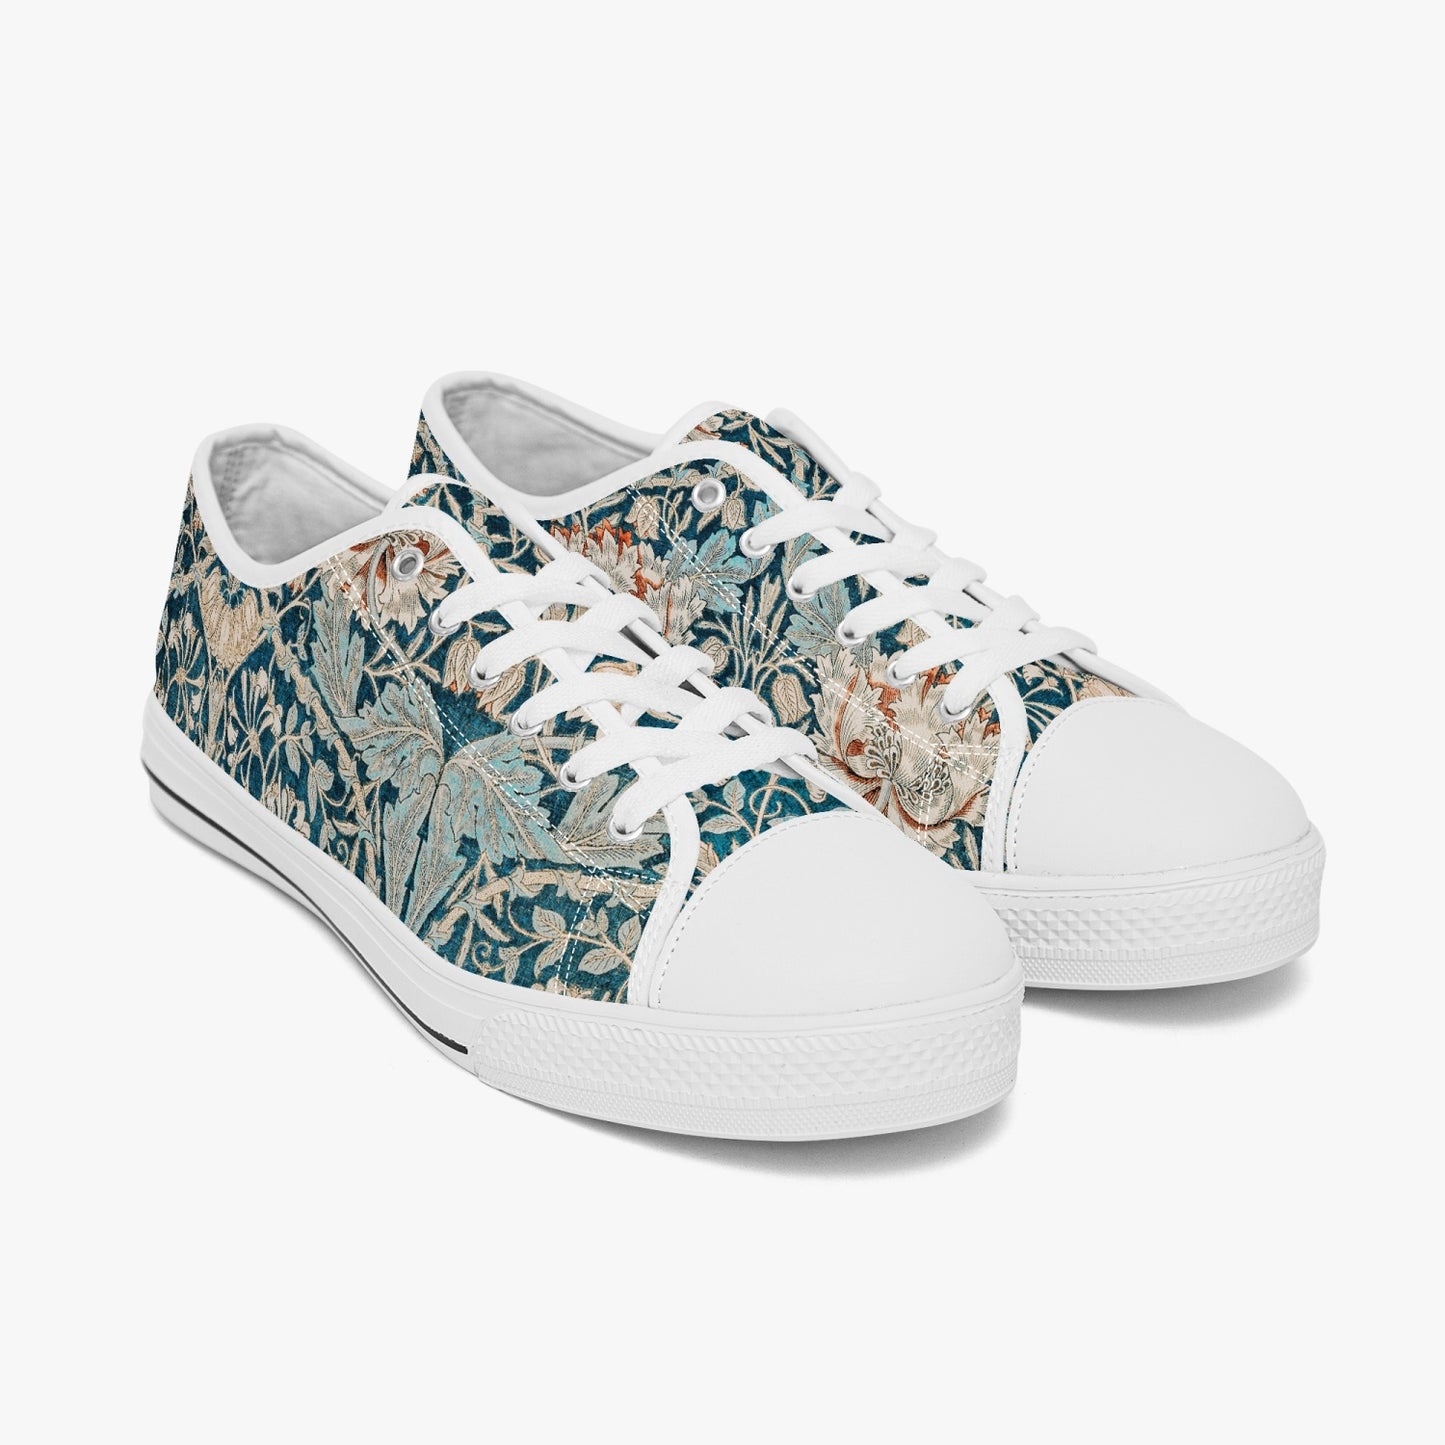 Flowered Sneakers: Canvas Low-Tops with Hyacinth William Morris Wallpaper Design